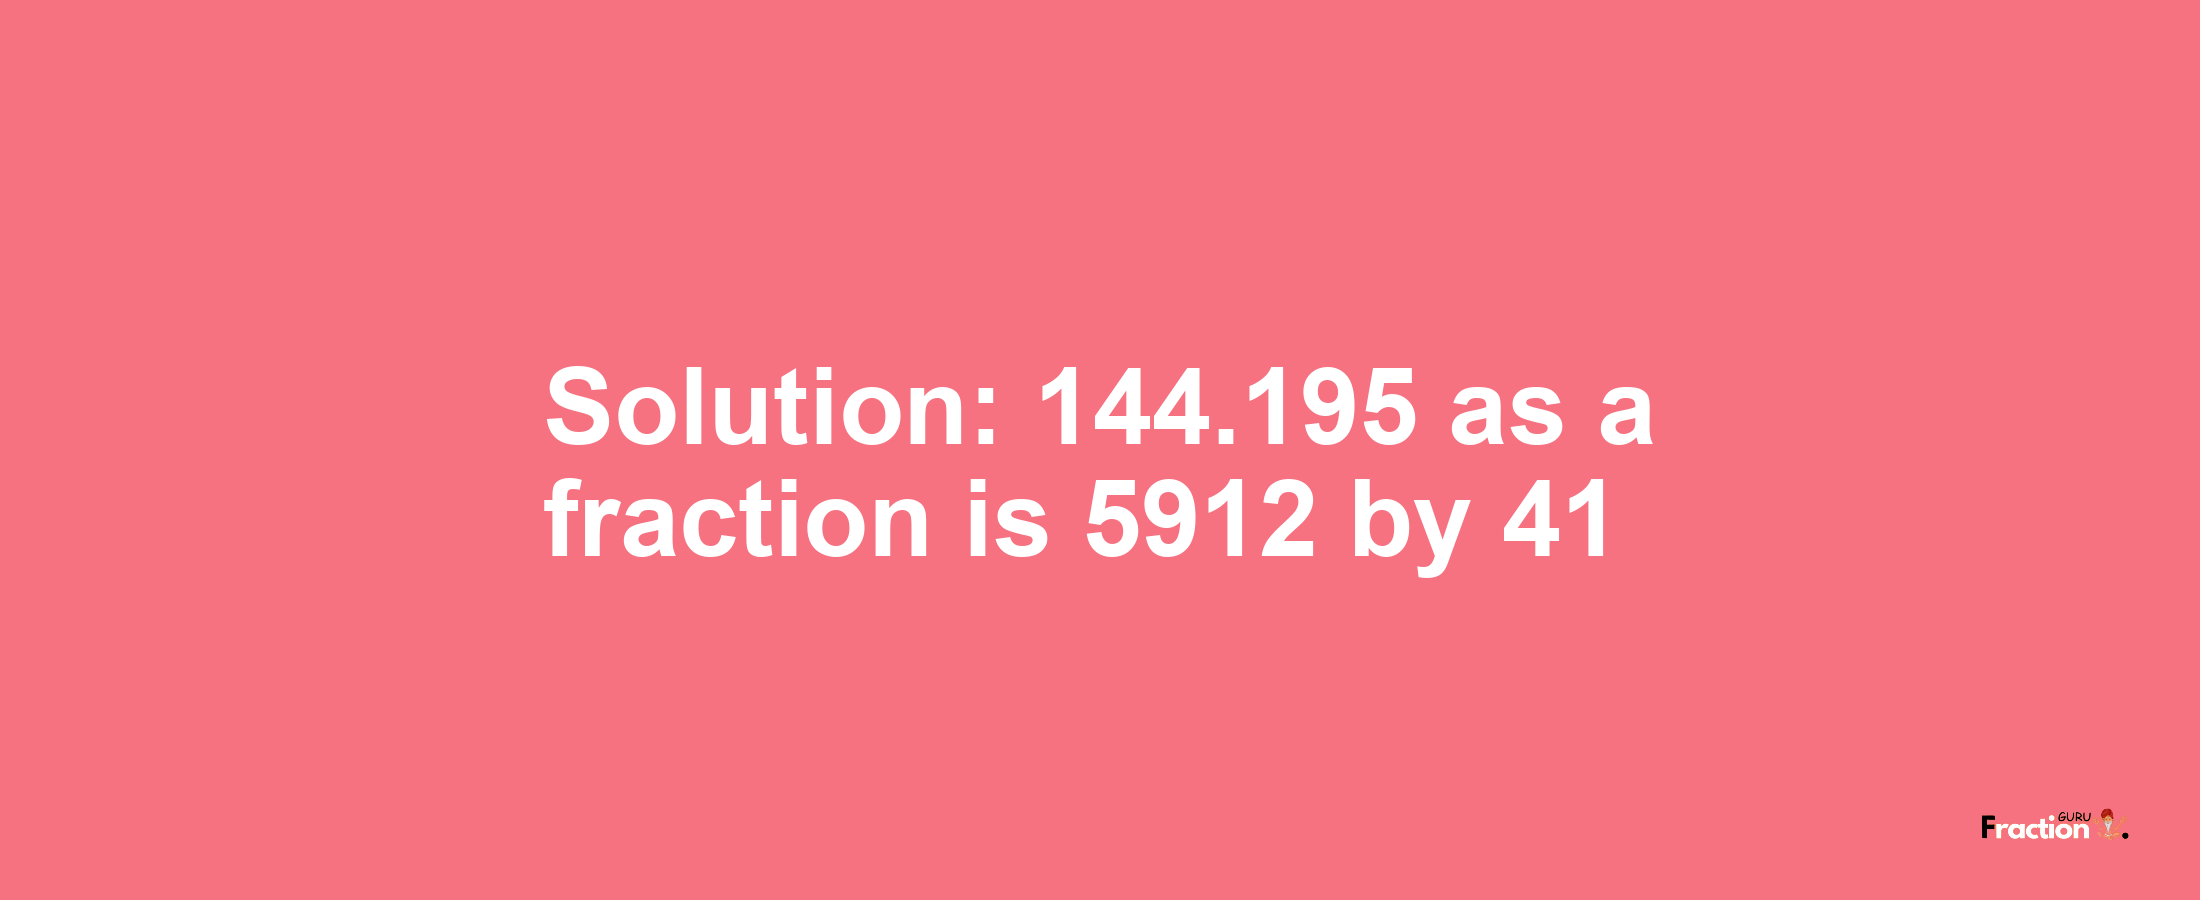 Solution:144.195 as a fraction is 5912/41